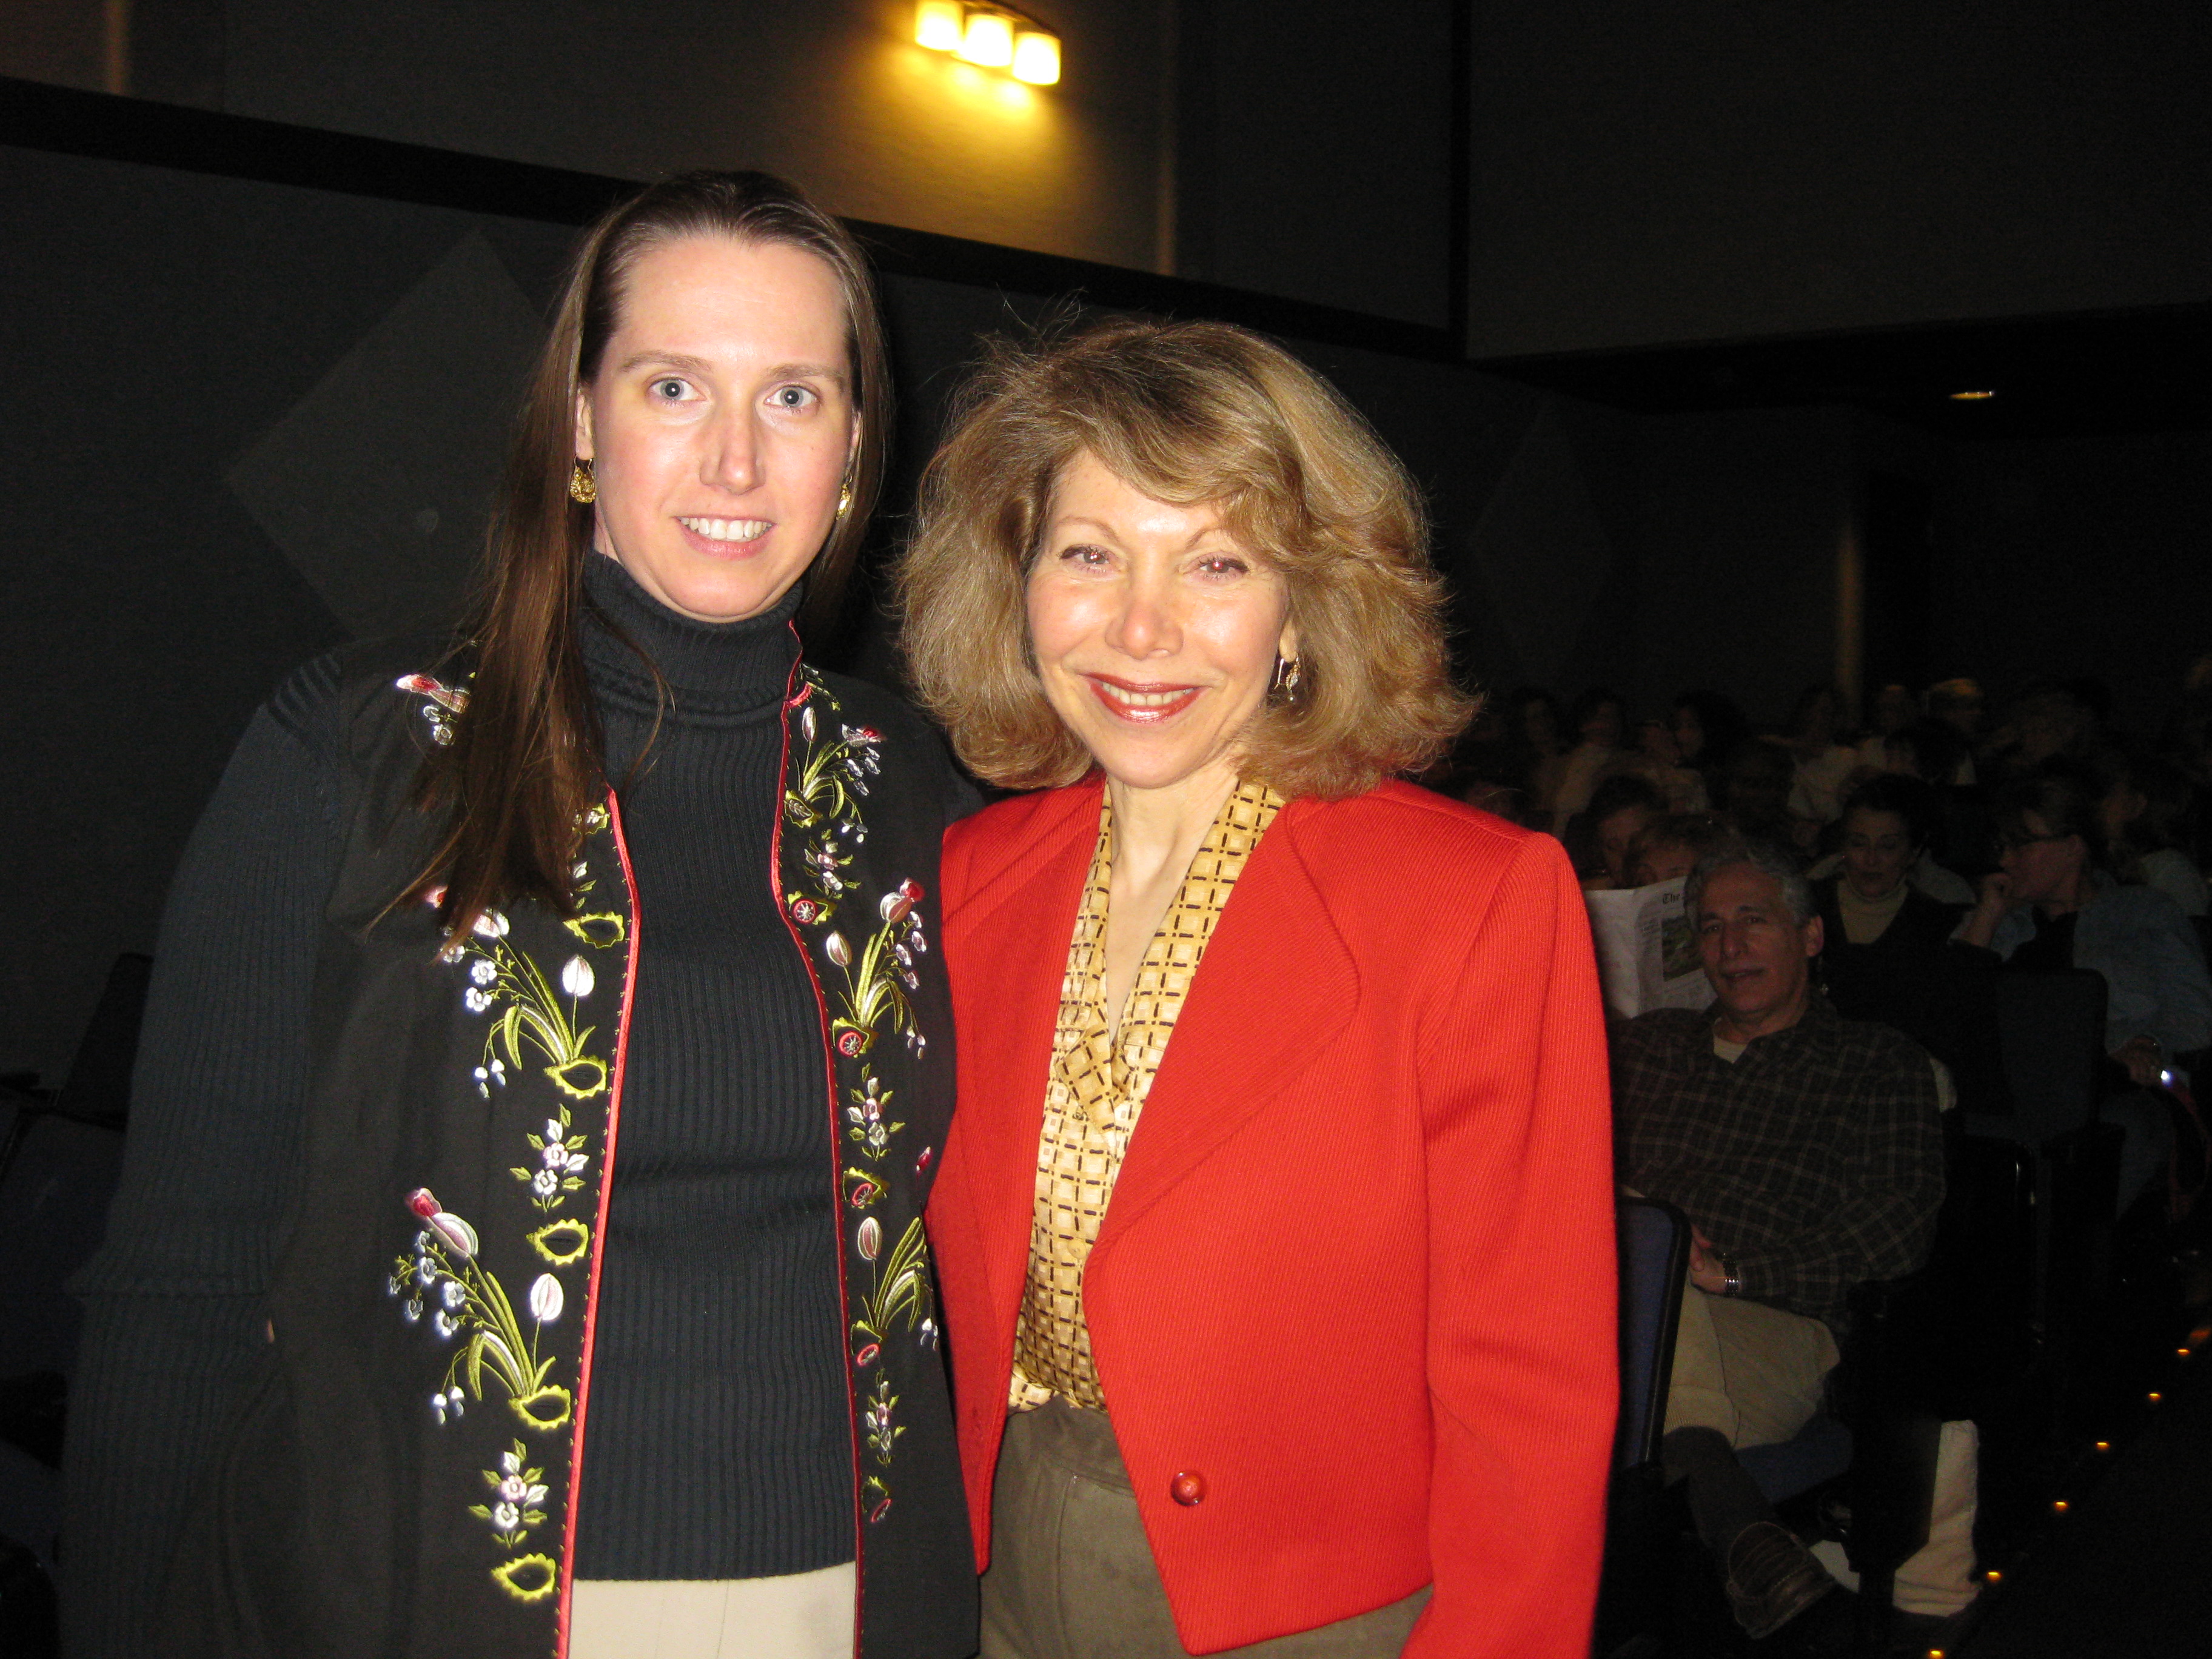 Fan Kimberly Wilder (l) with composer/conductor Victoria Bond